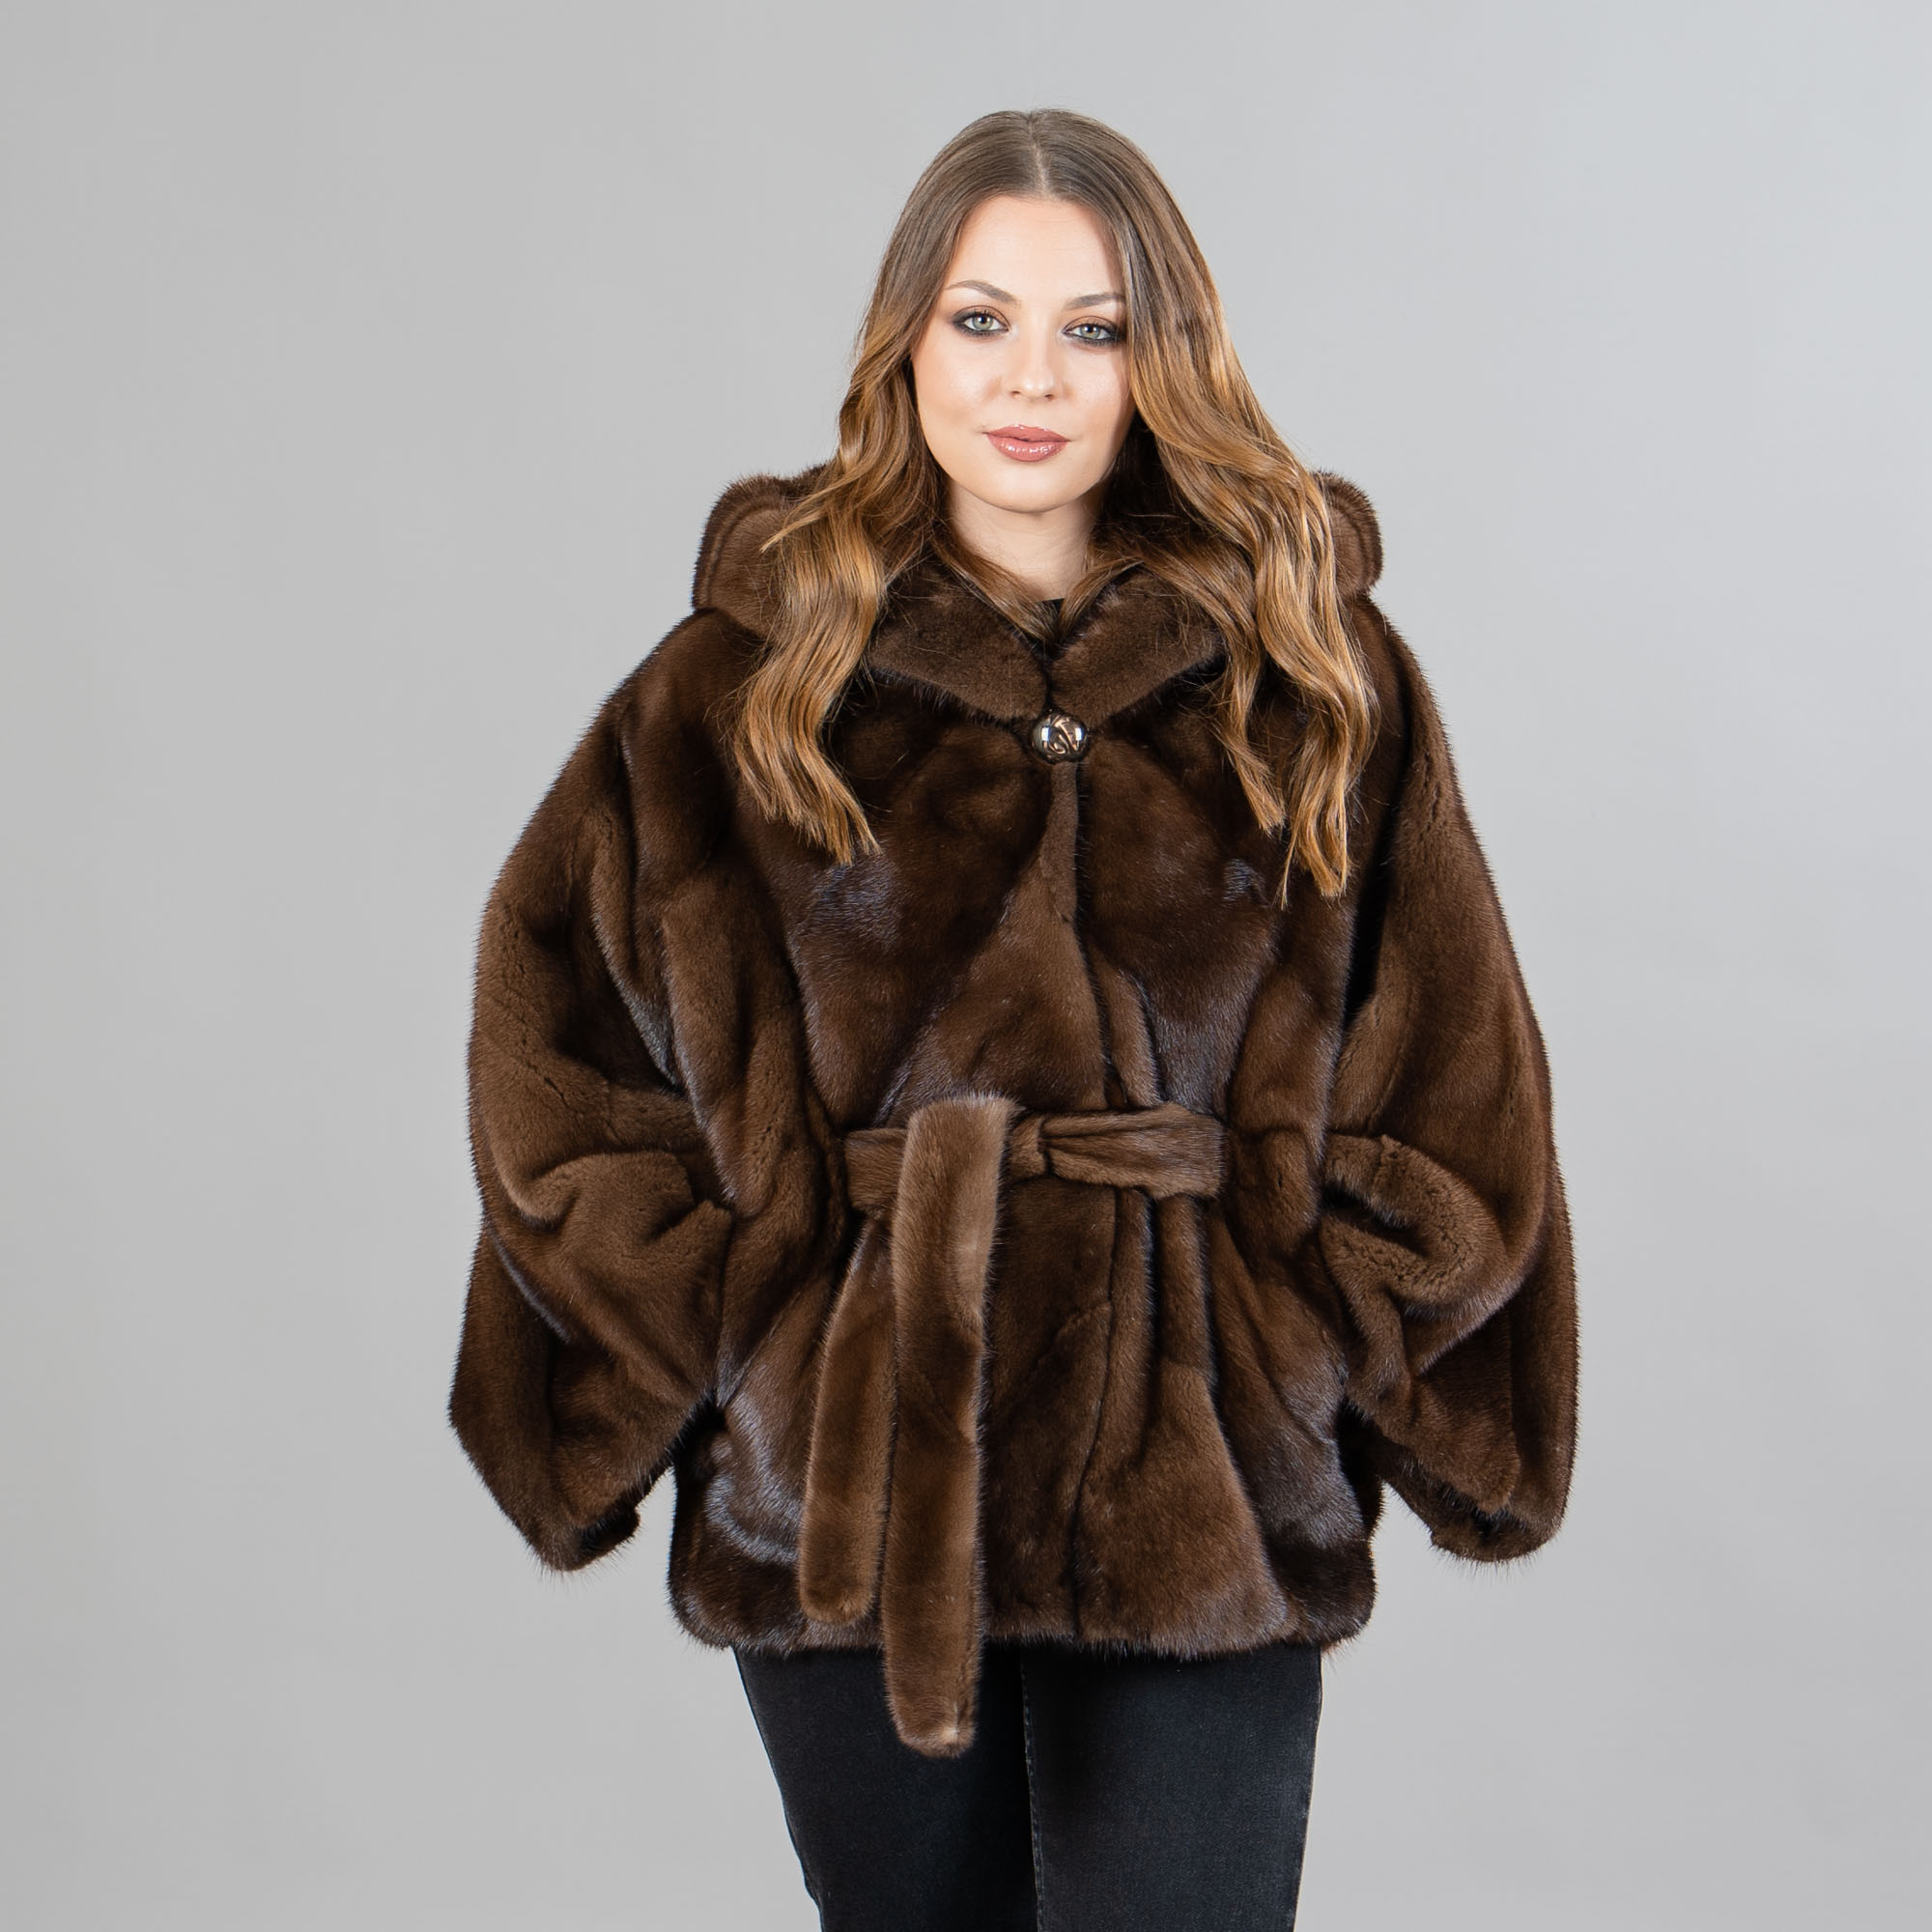 Mink fur cape with a hood and belt in brown color